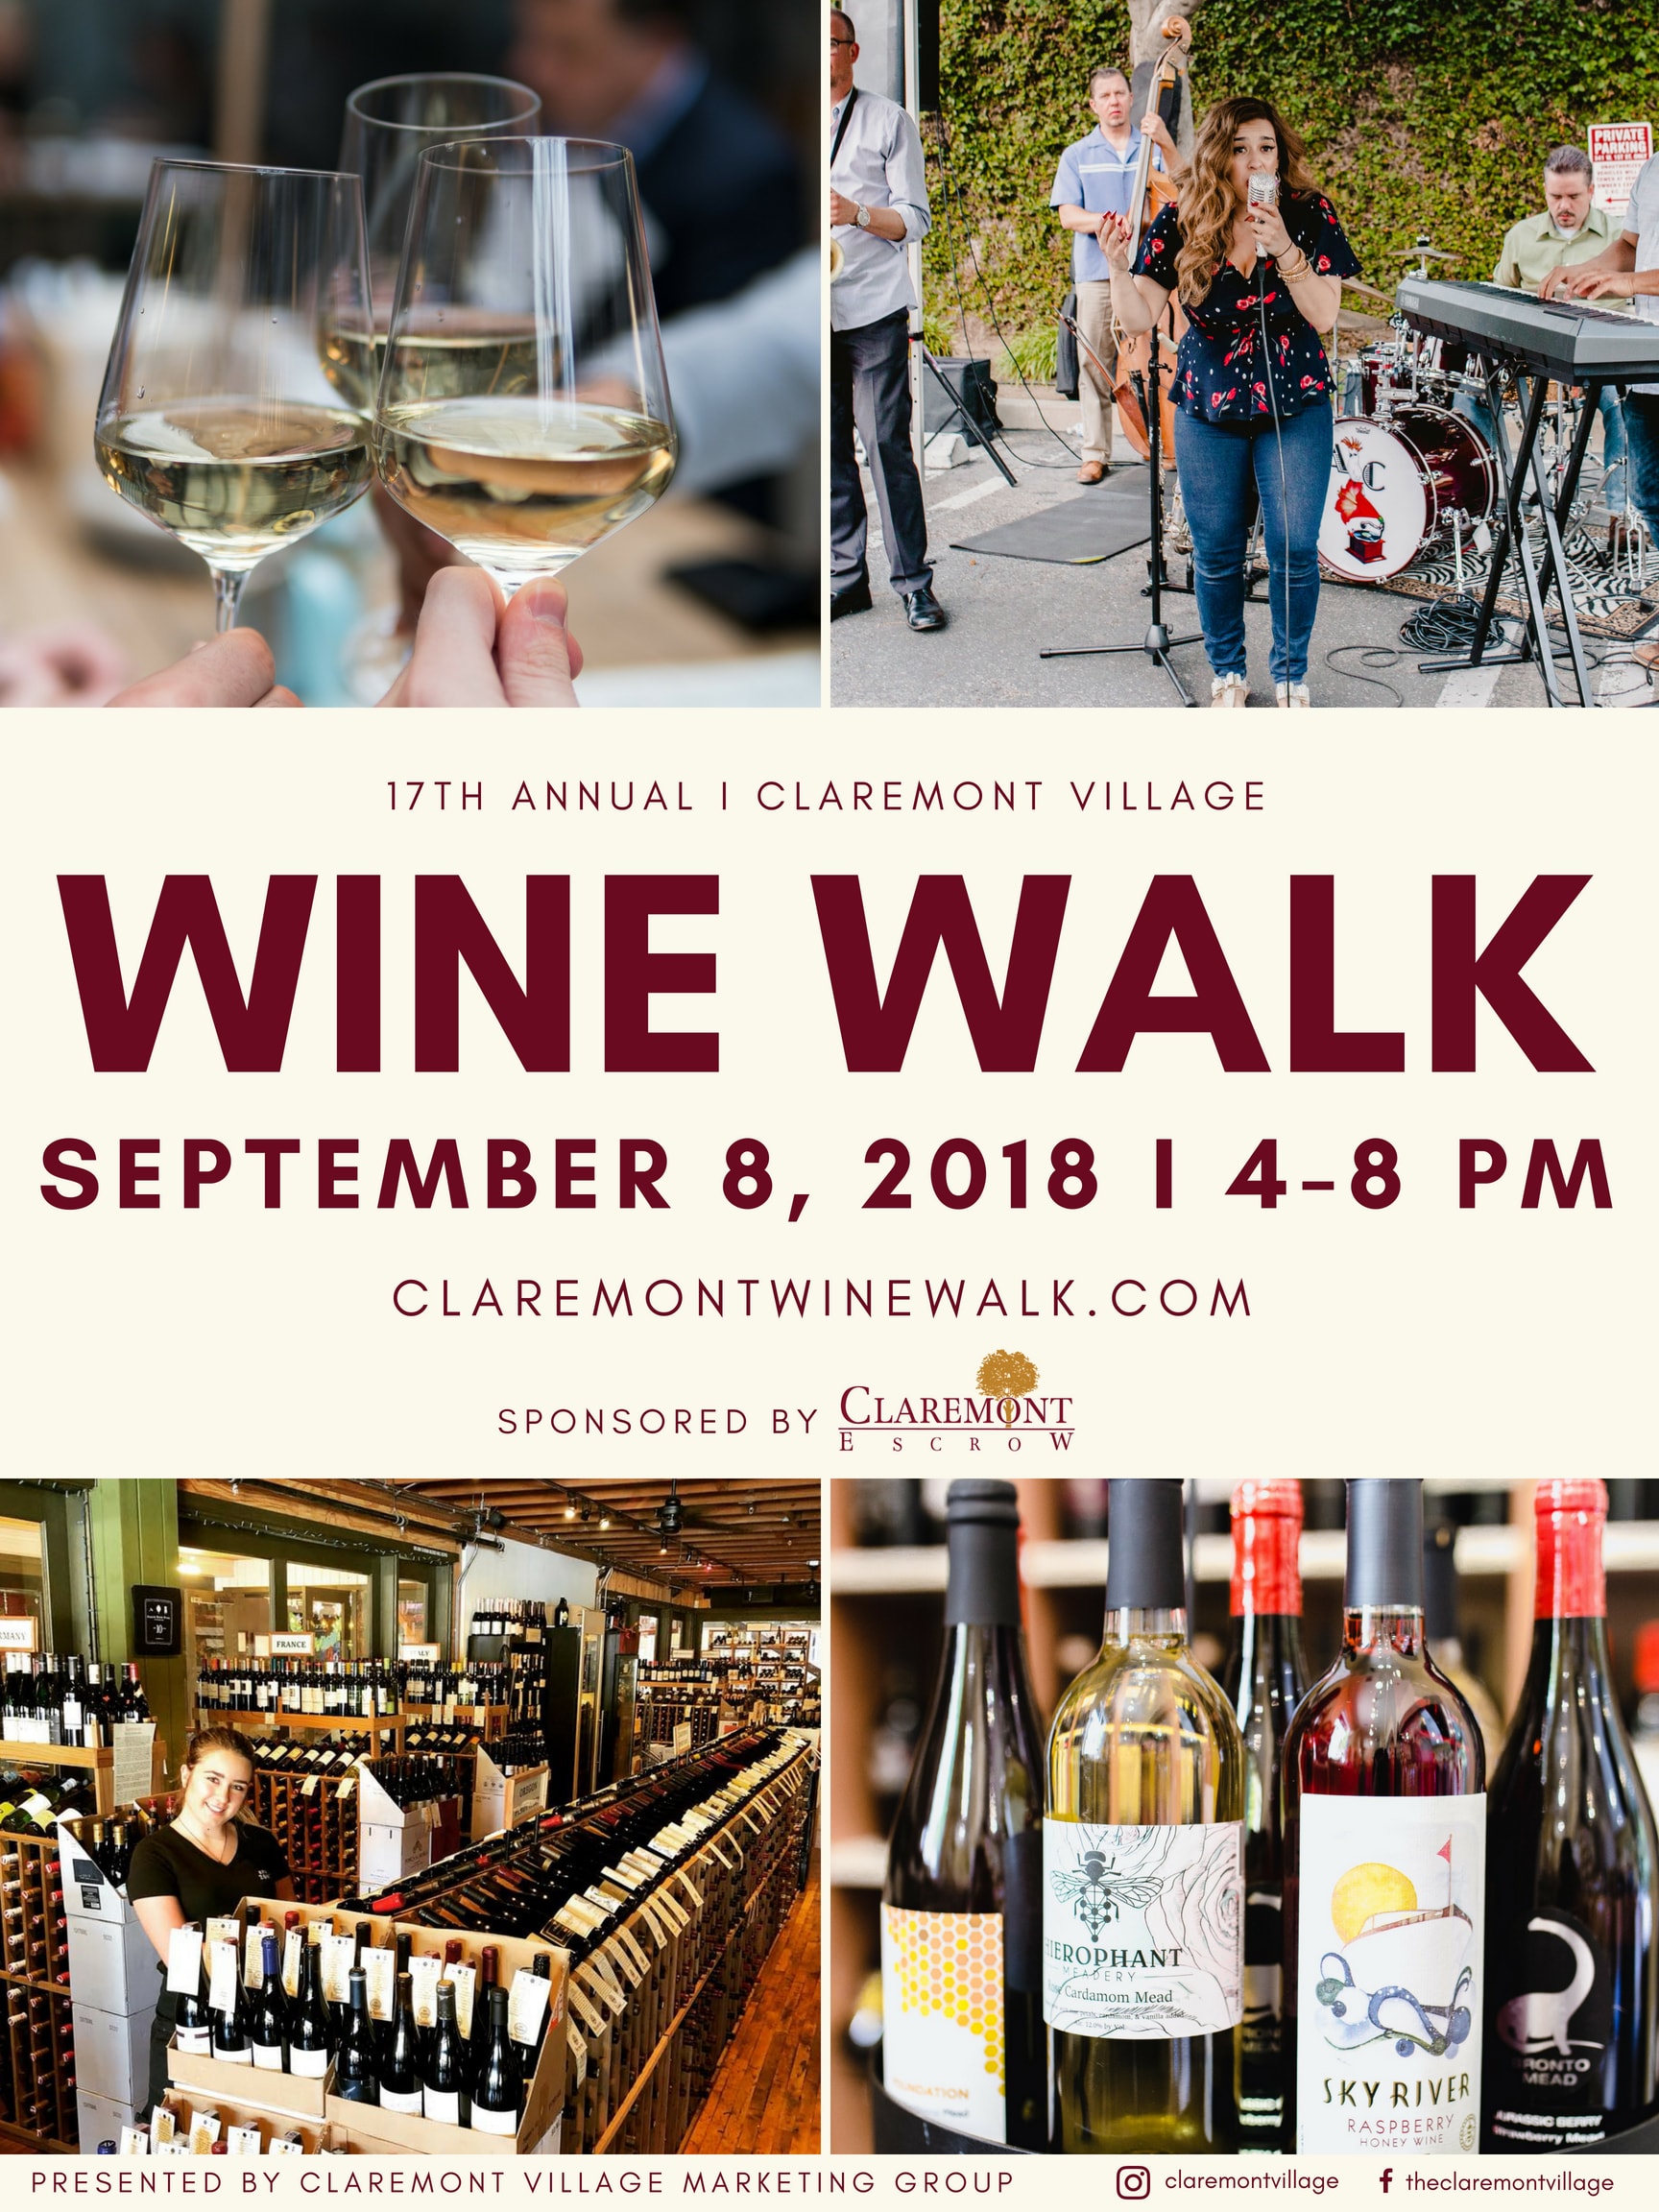 SOLD OUT 17th Annual Claremont Village Wine Walk Tickets, Sat, Sep 8